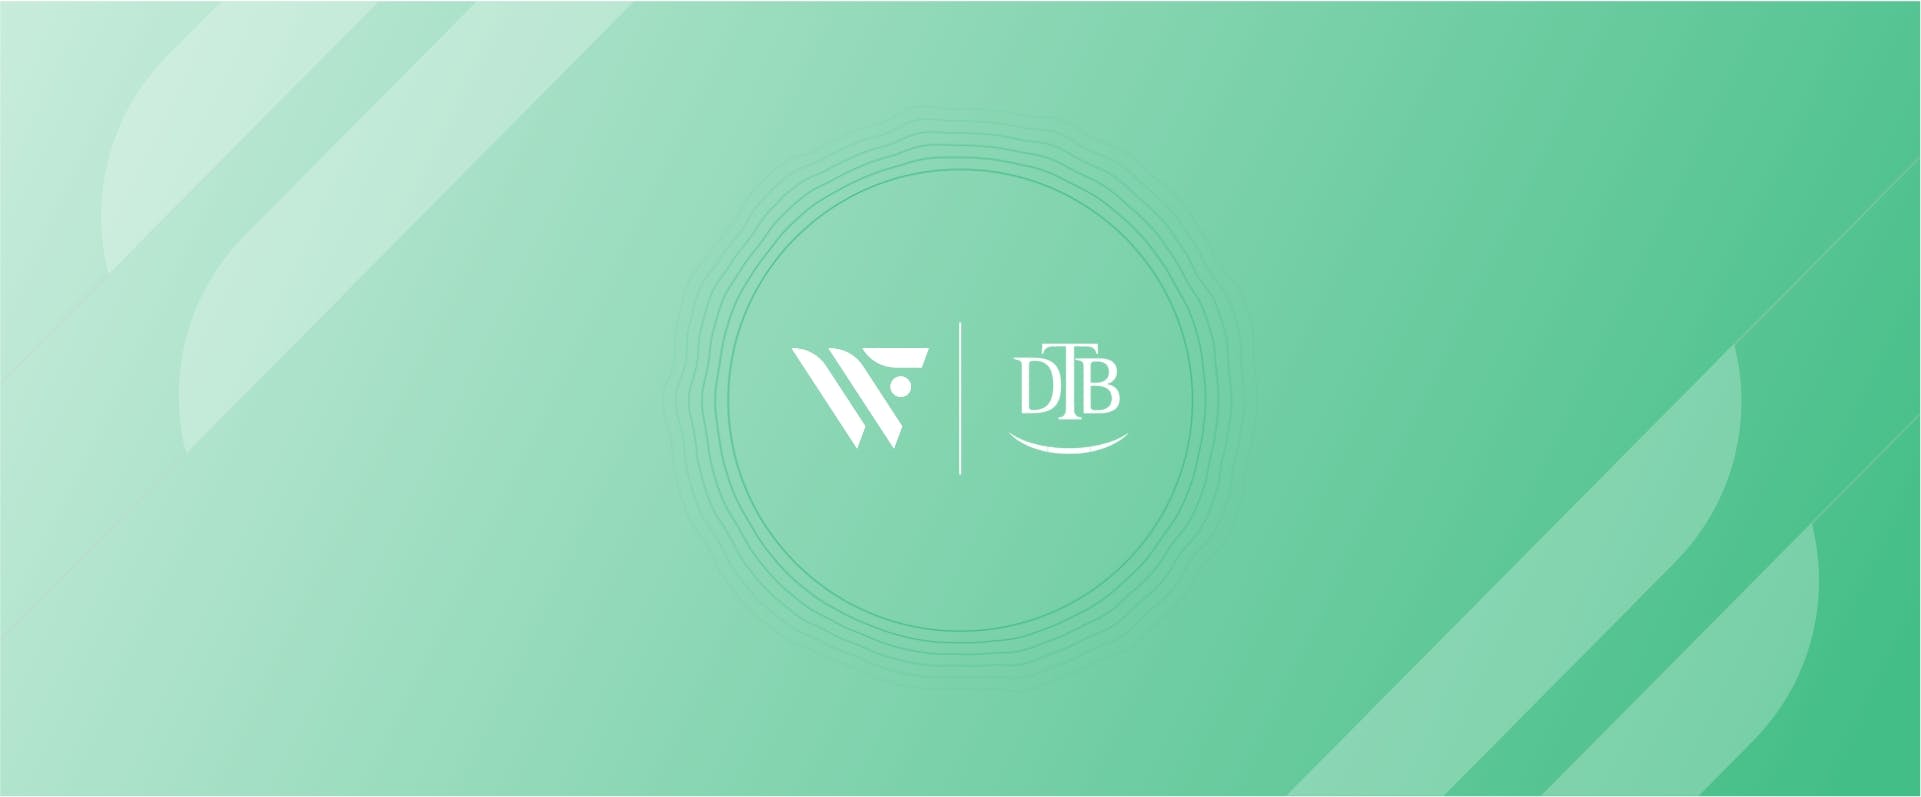 Wingfield and DTB Logo.